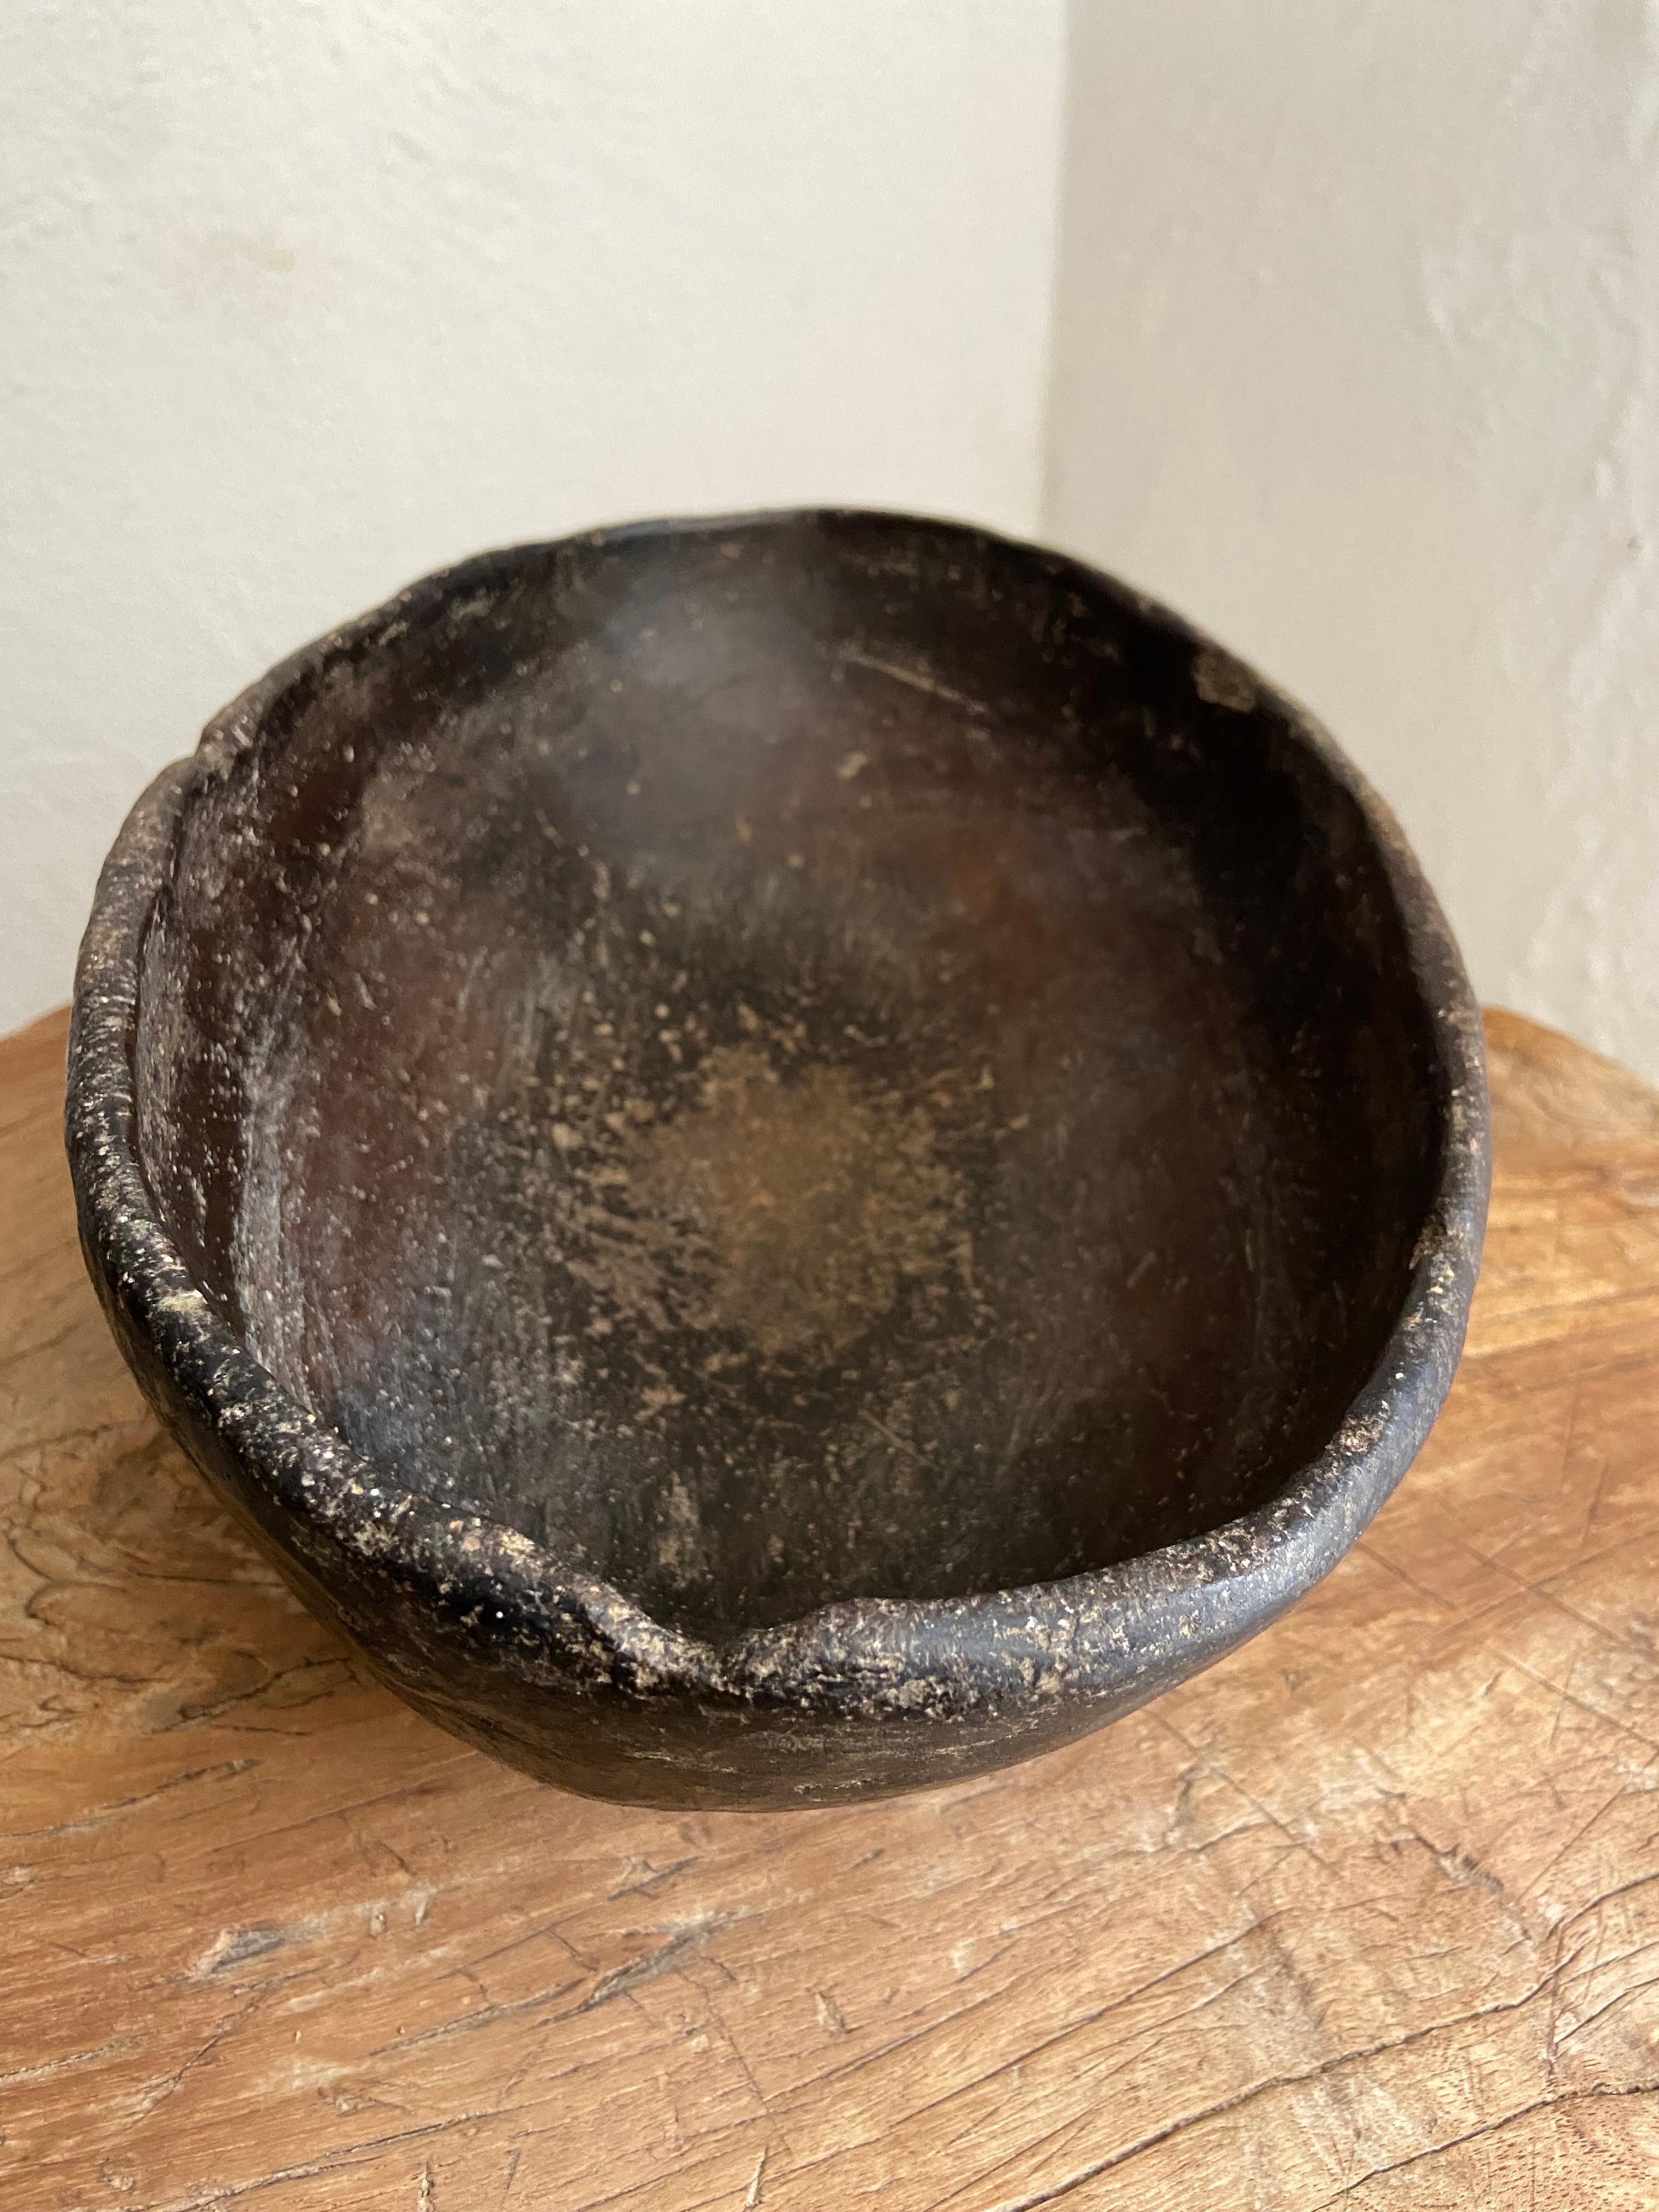 Fired Primitive Styled Ceramic Bowl From The Mixteca Region of Oaxaca, Mexico